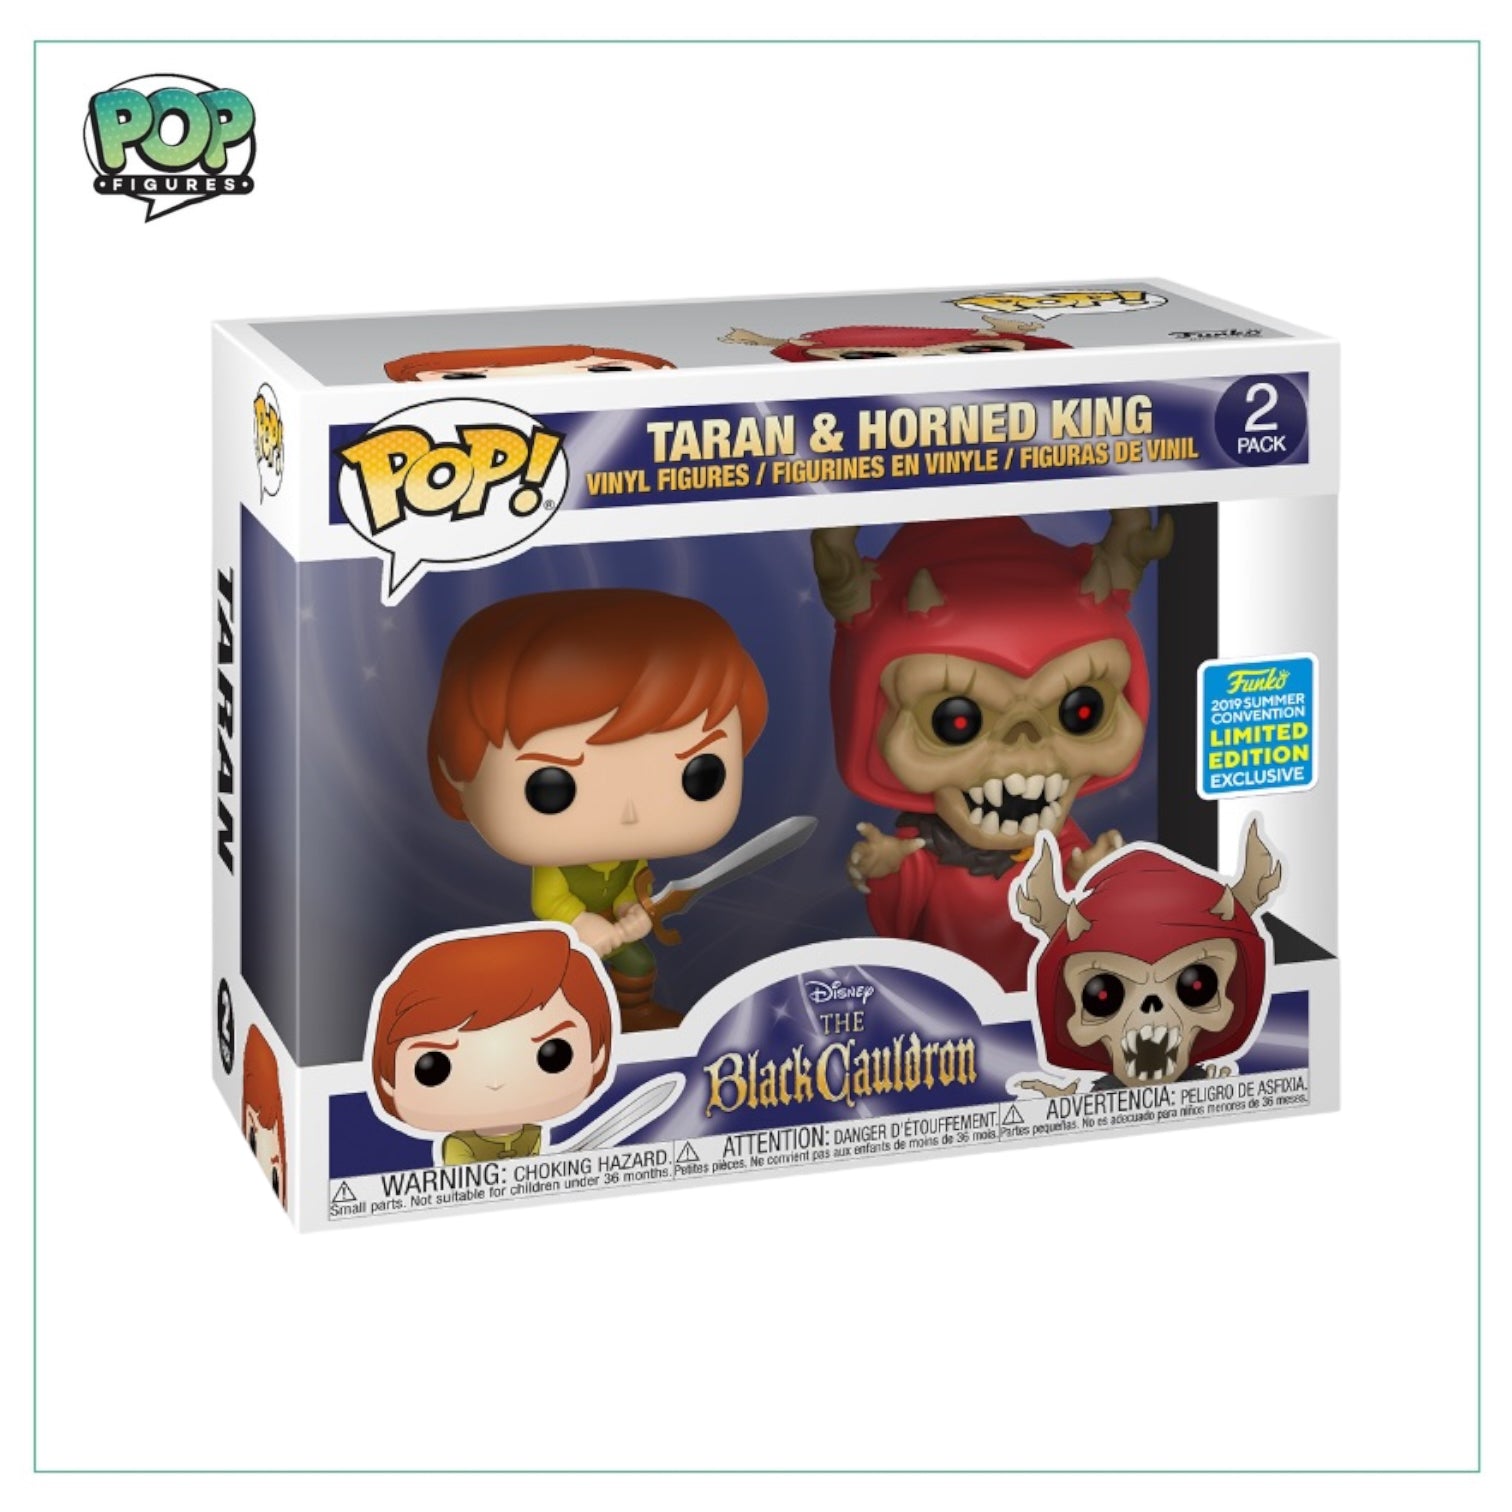 Taran & Horned King Deluxe Funko 2 Pack! - The Black Cauldron - 2019 SDCC Shared Exclusive